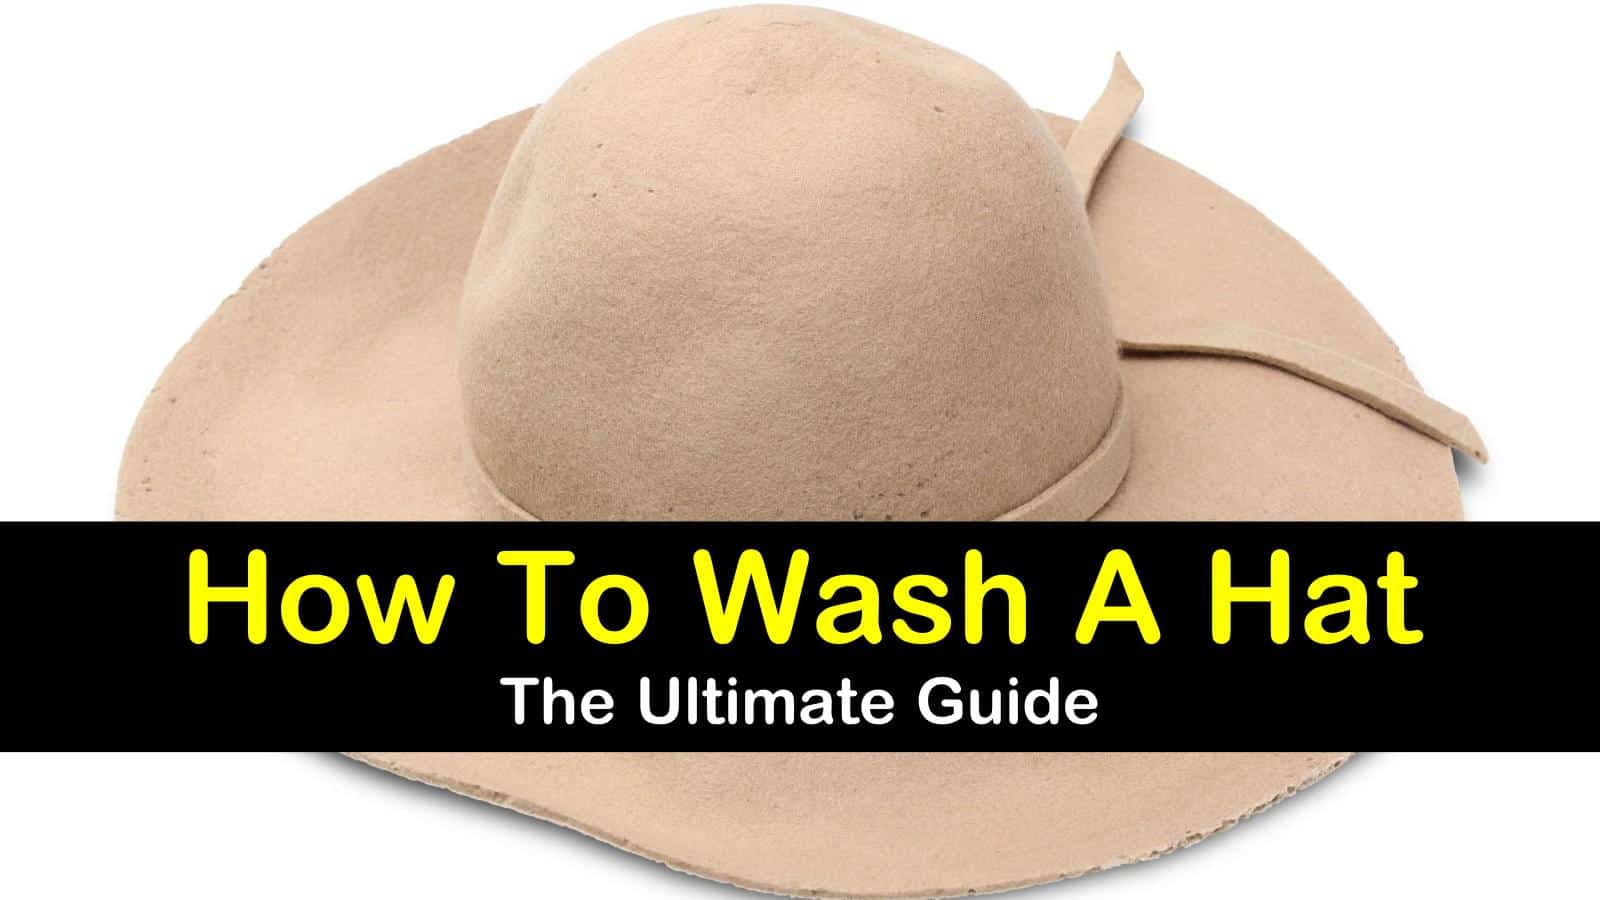 8 Simple Ways To Wash A Hat,Elementary School Graduation Gifts